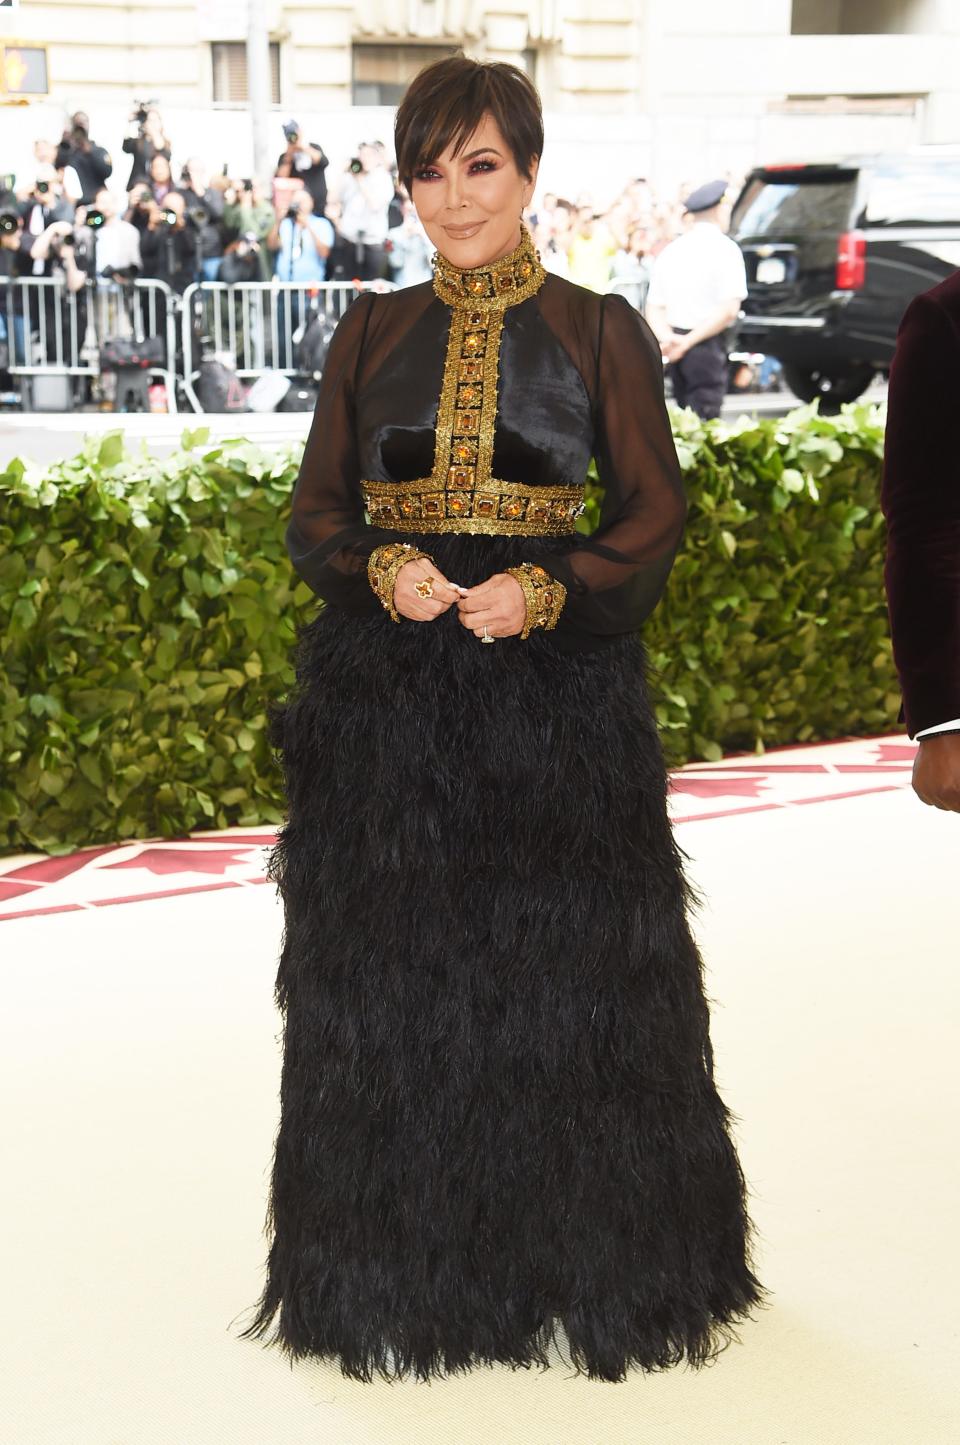 Kris Jenner at Met Gala 2018, wearing a floor-length black gown with a feathered skirt and gold embellishment on the cuffs and neck.